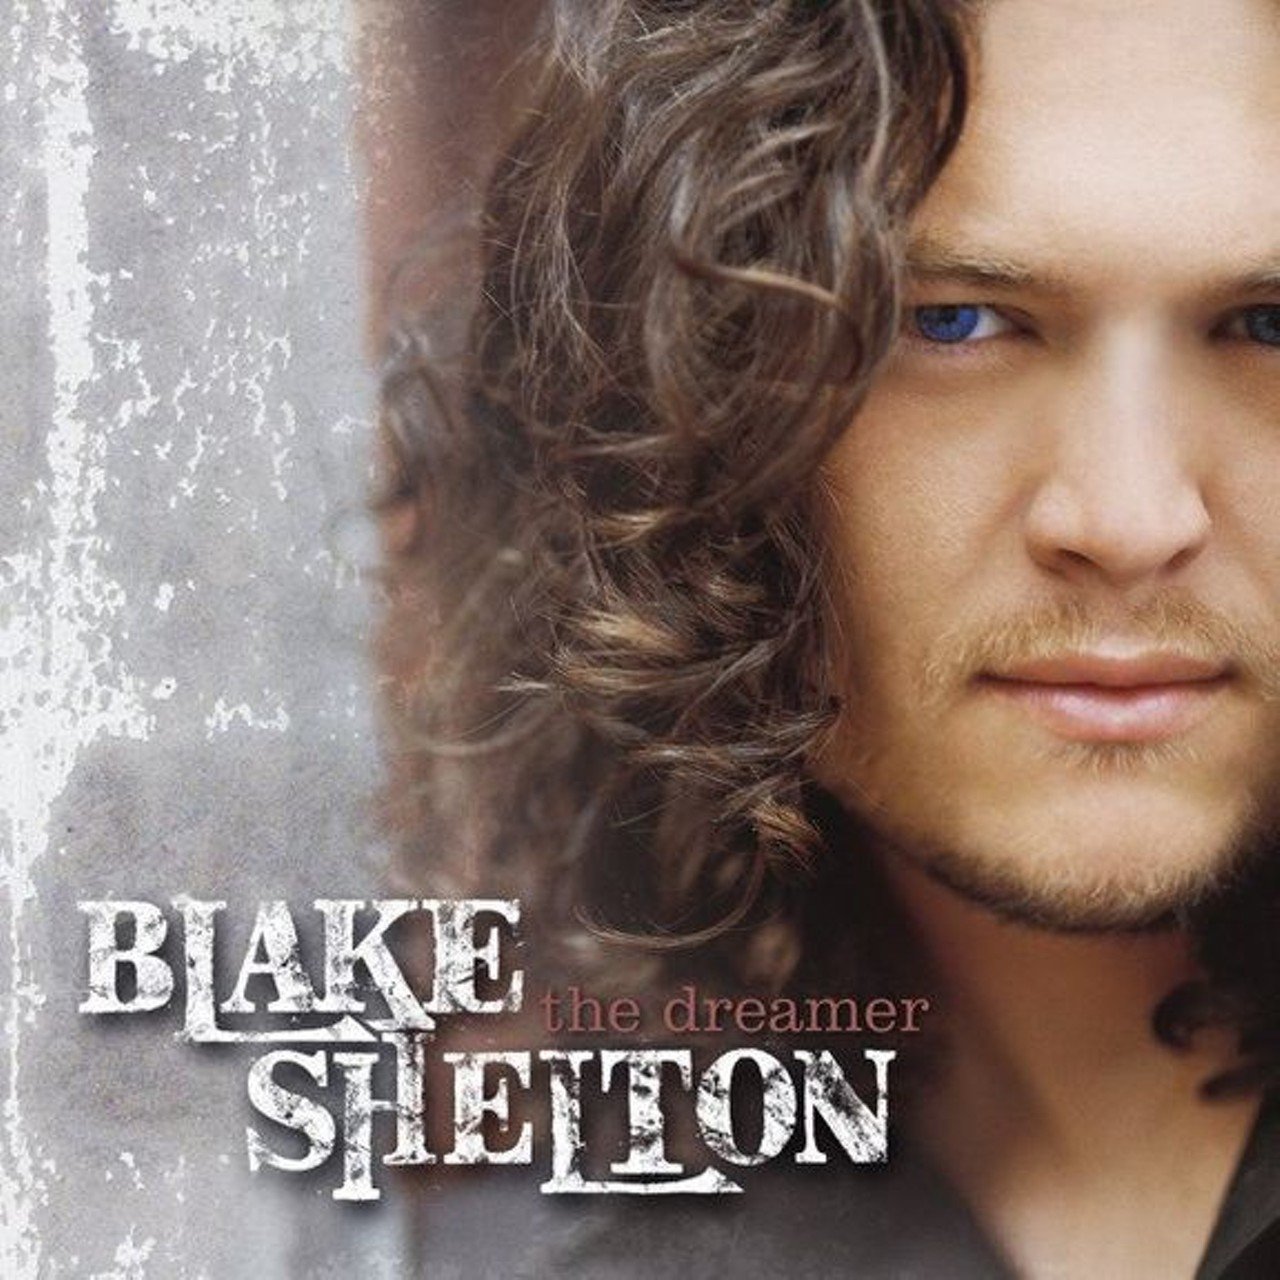 "The Baby" by Blake Shelton 
Turned 21 in Cincinnati
I called home to mom and daddy